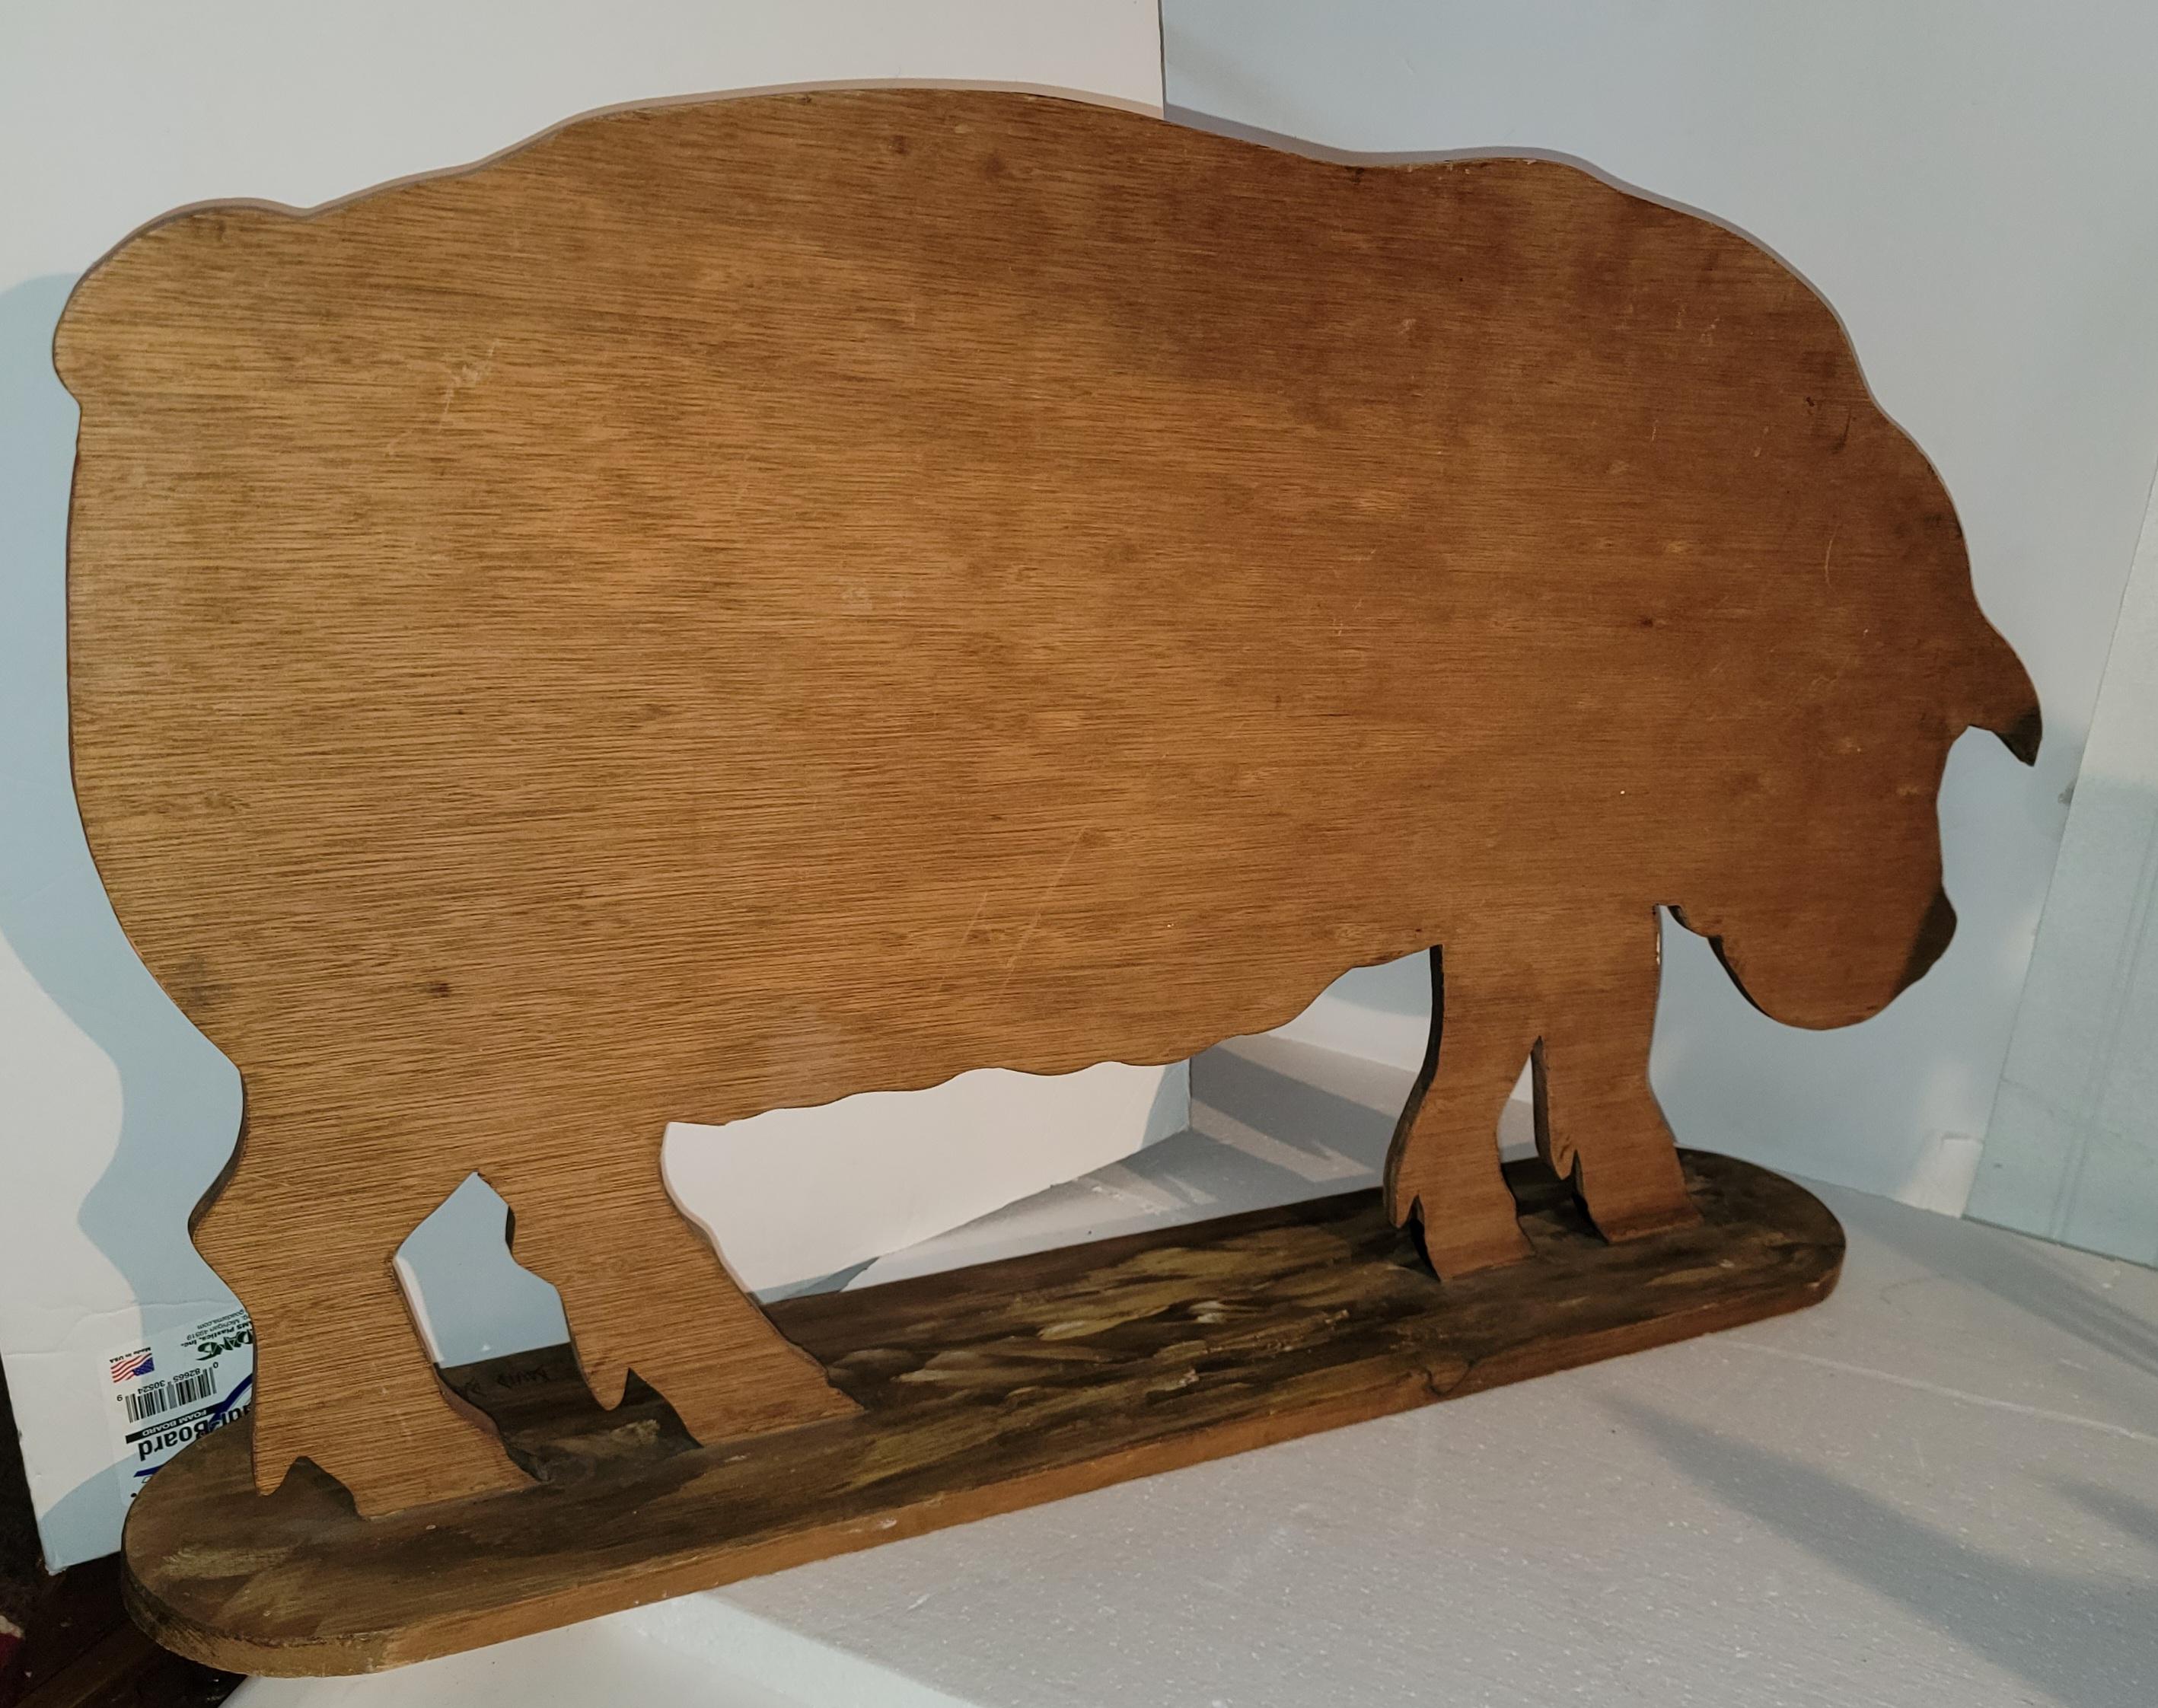 Hand carved wooden pig with original paint. Signed David Barber. Very well done.
33 W x 19.5 H x D.